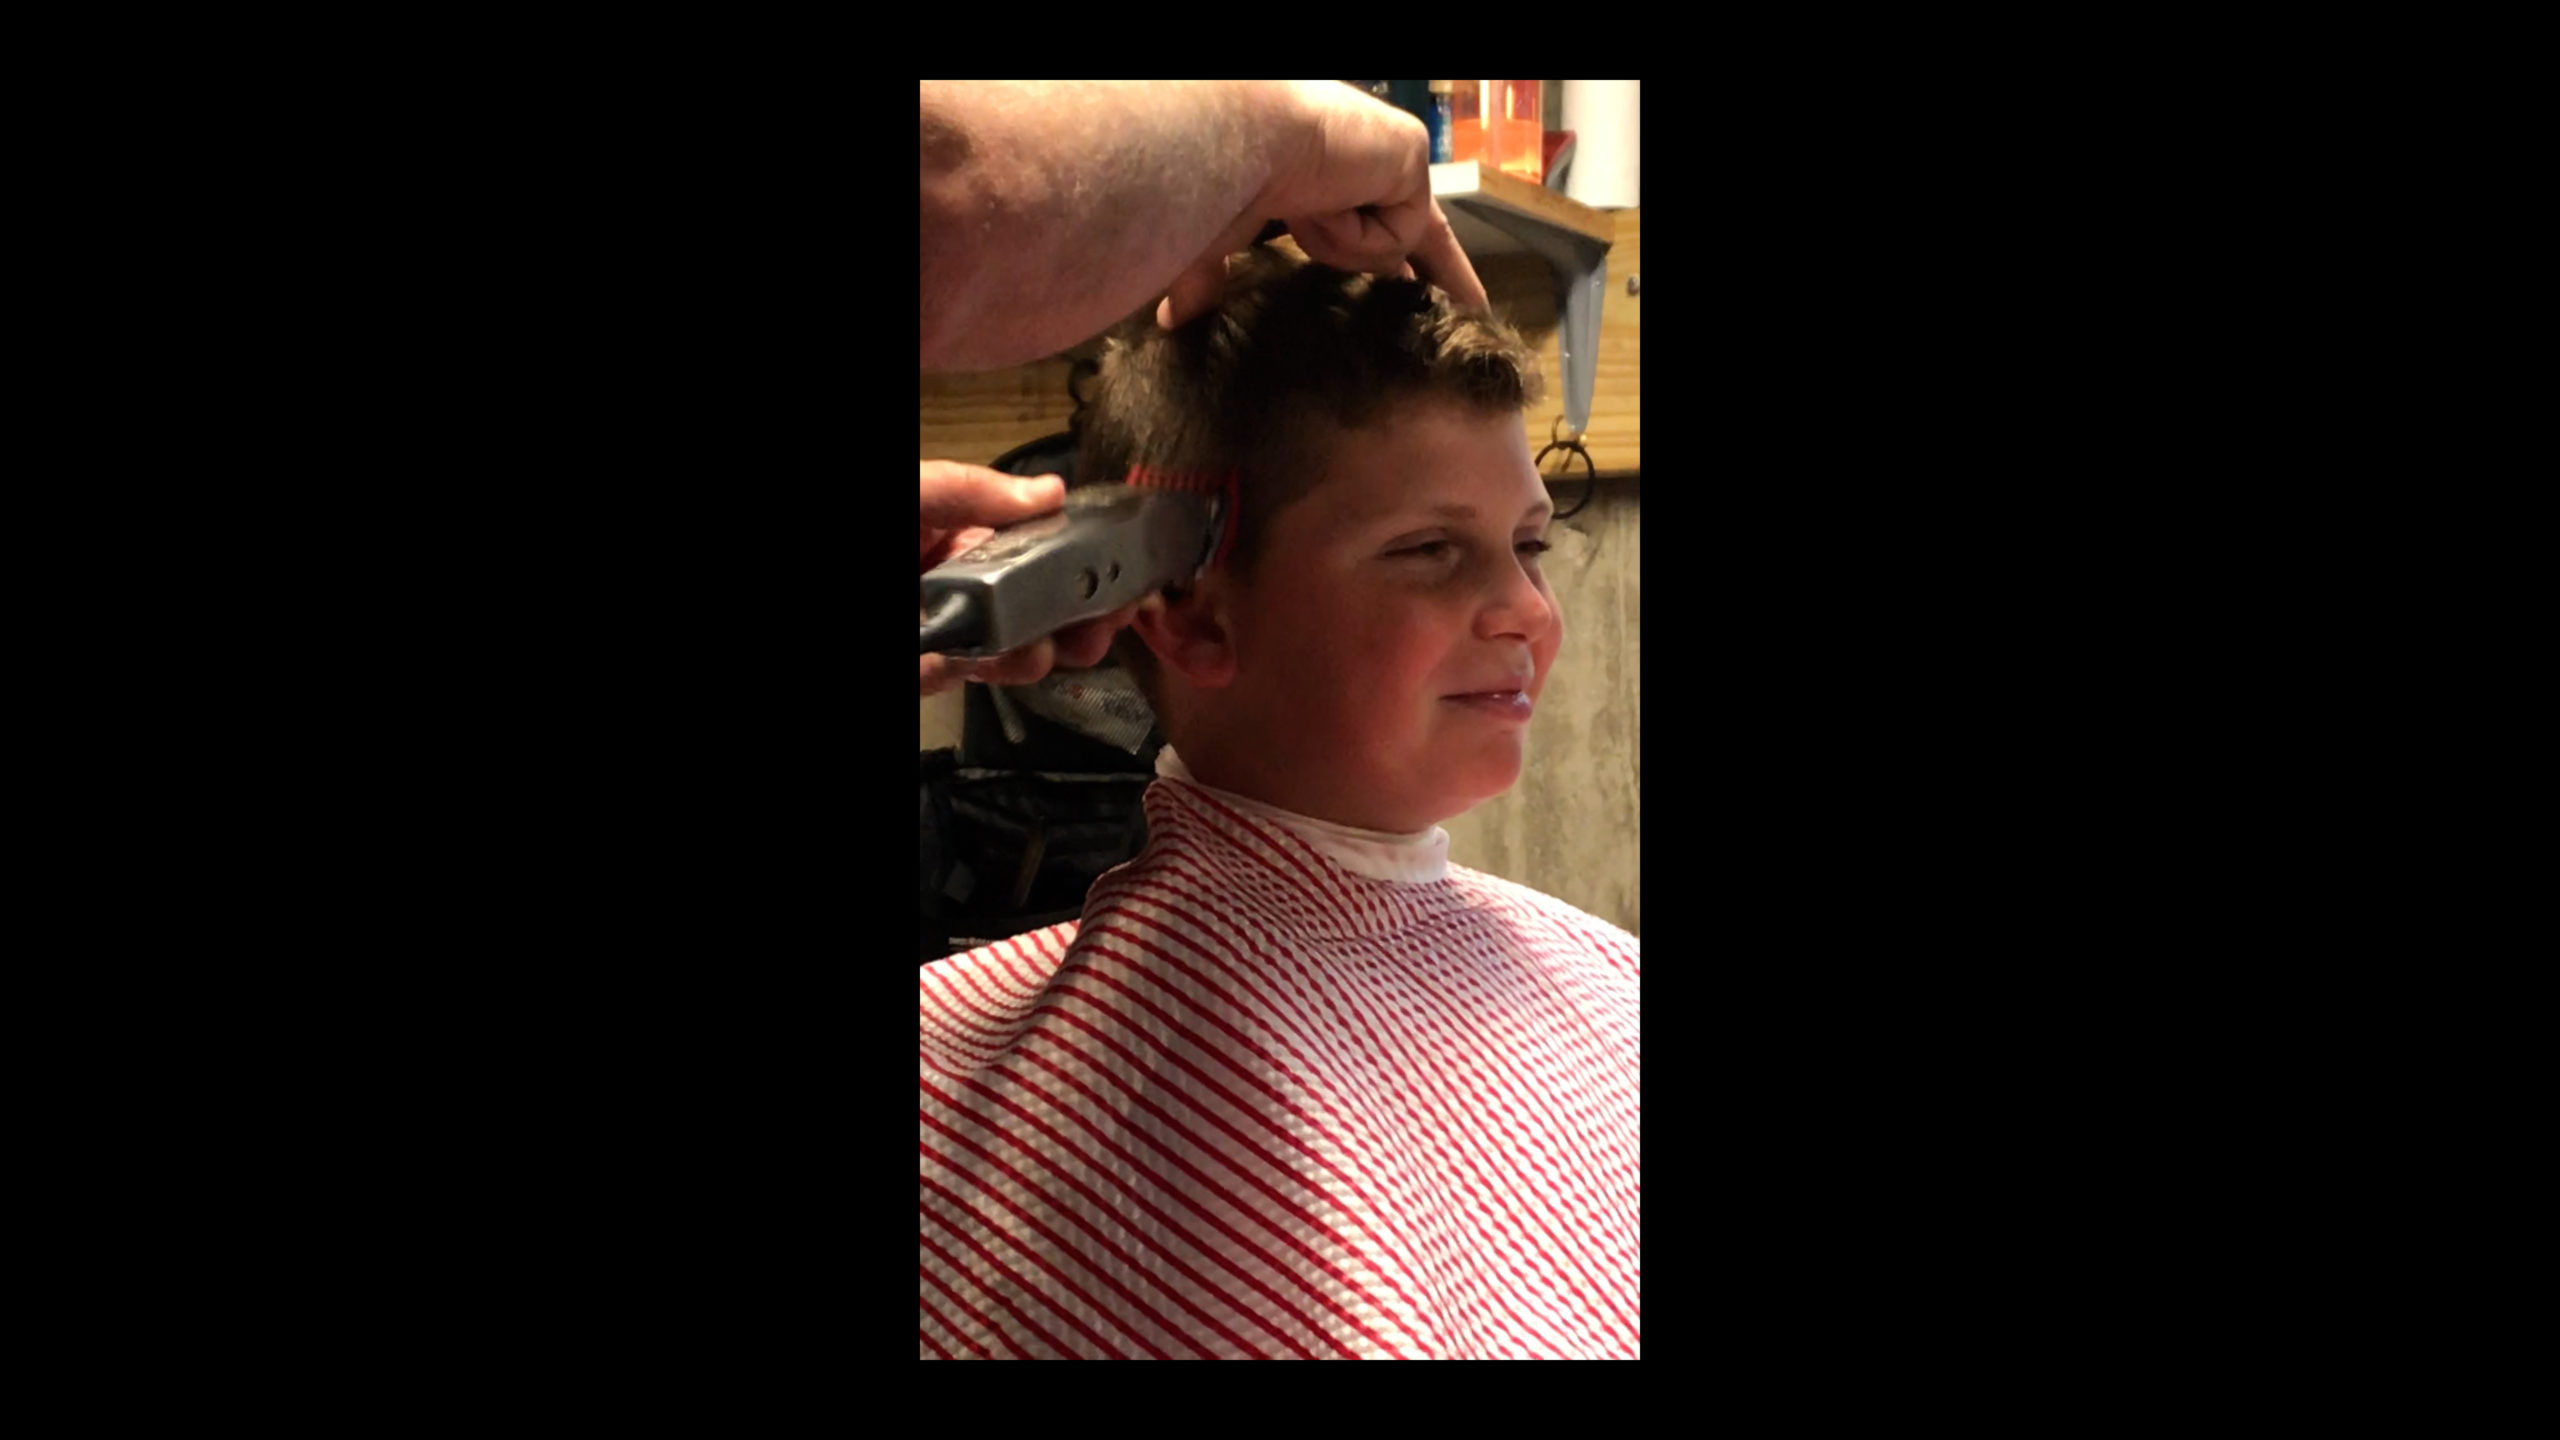 Nick Mazzeo gives a home haircut to Dominic Mazzeo.